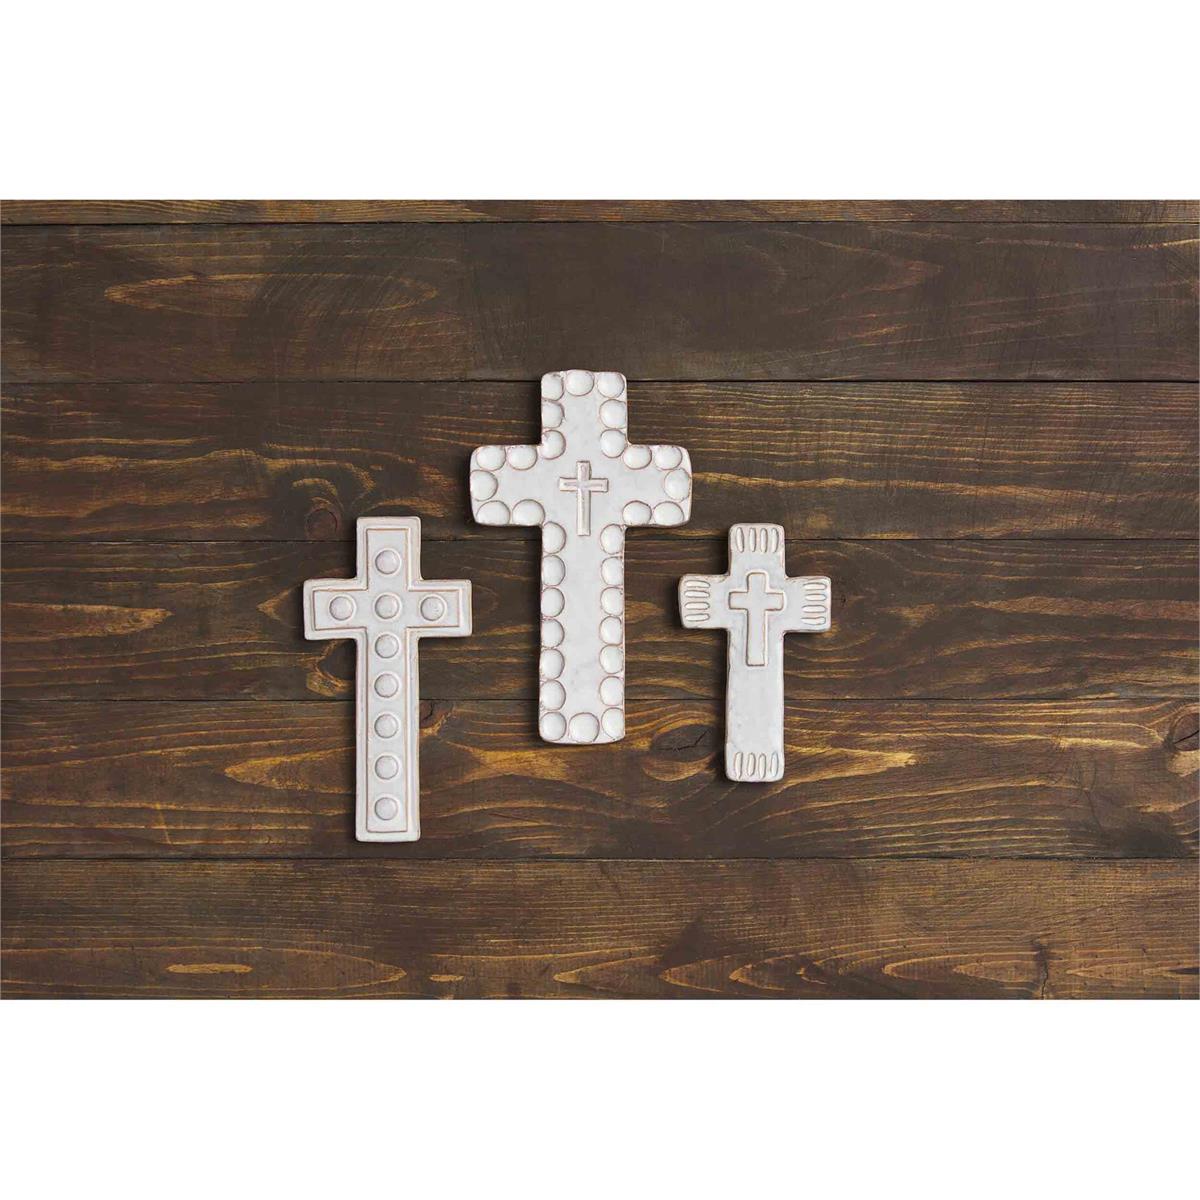 all three sizes of cross sitters displayed on a dark stained wood slat surface